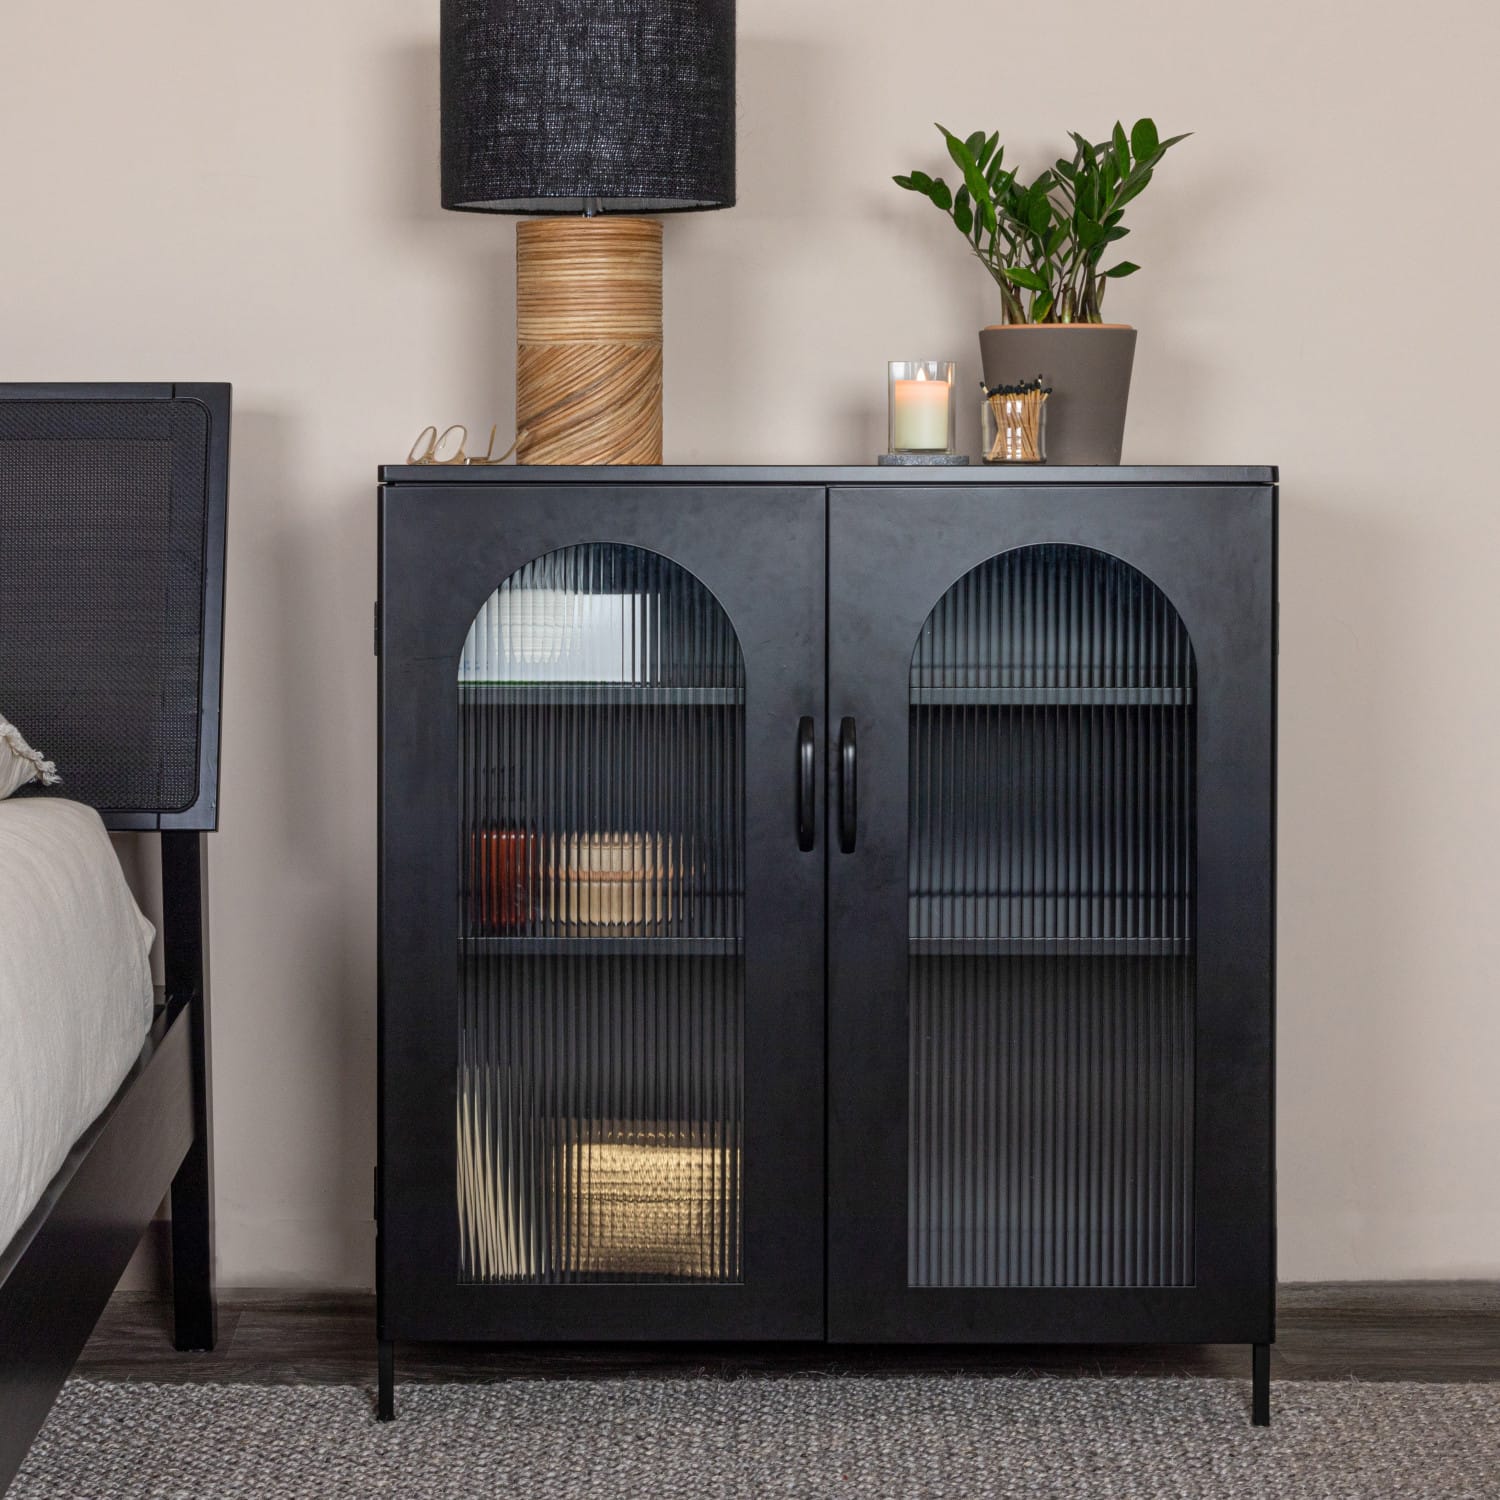 Solstice 3ft. Black Metal Cabinet with Arched Glass Doors